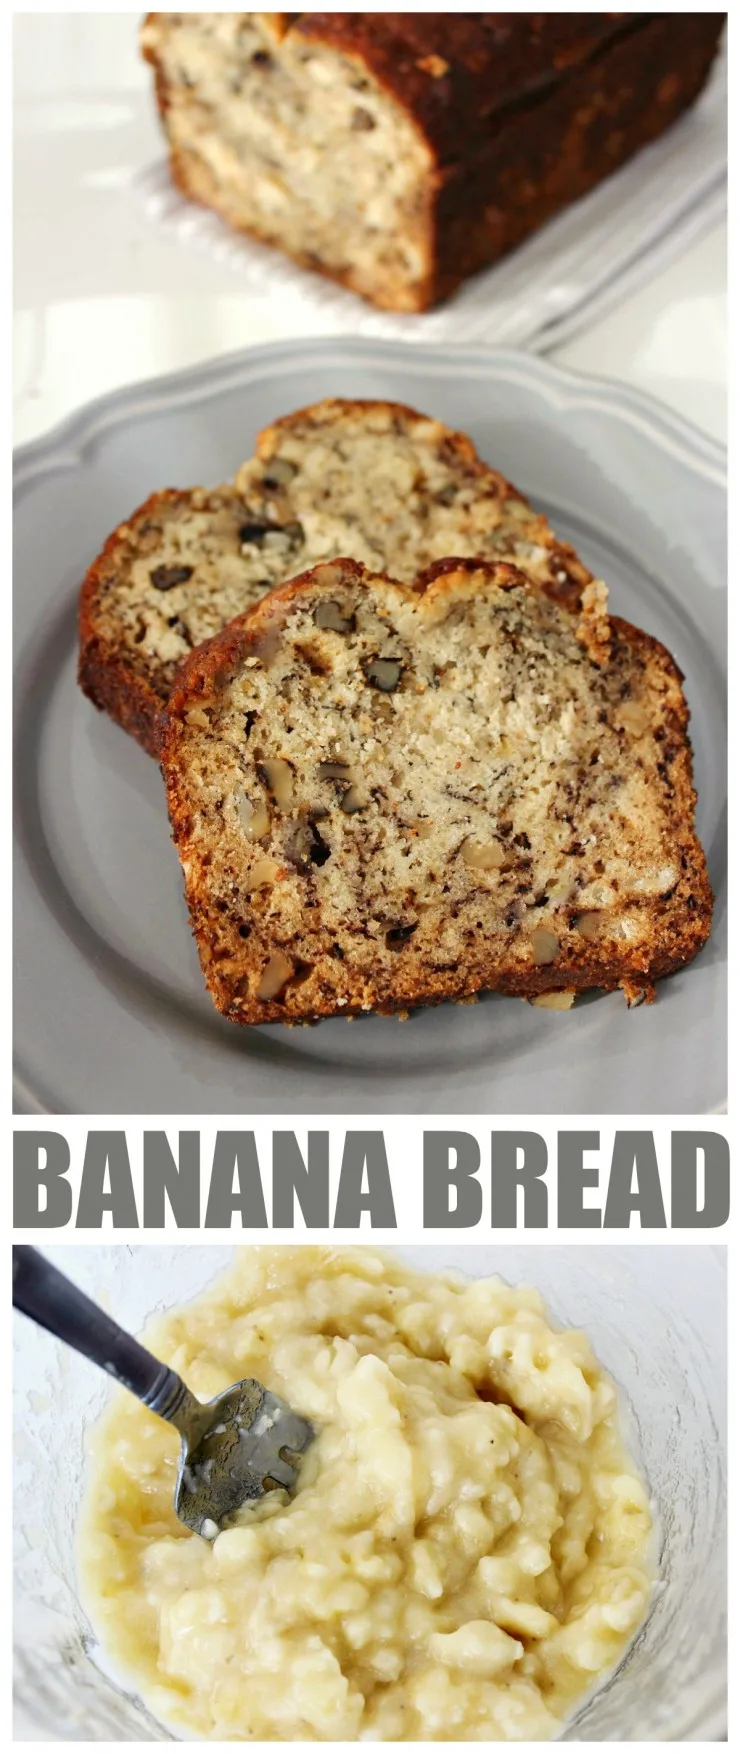 Banana bread is a great way to use up over-ripe bananas and this recipe is seriously simple and you can’t go wrong with that!